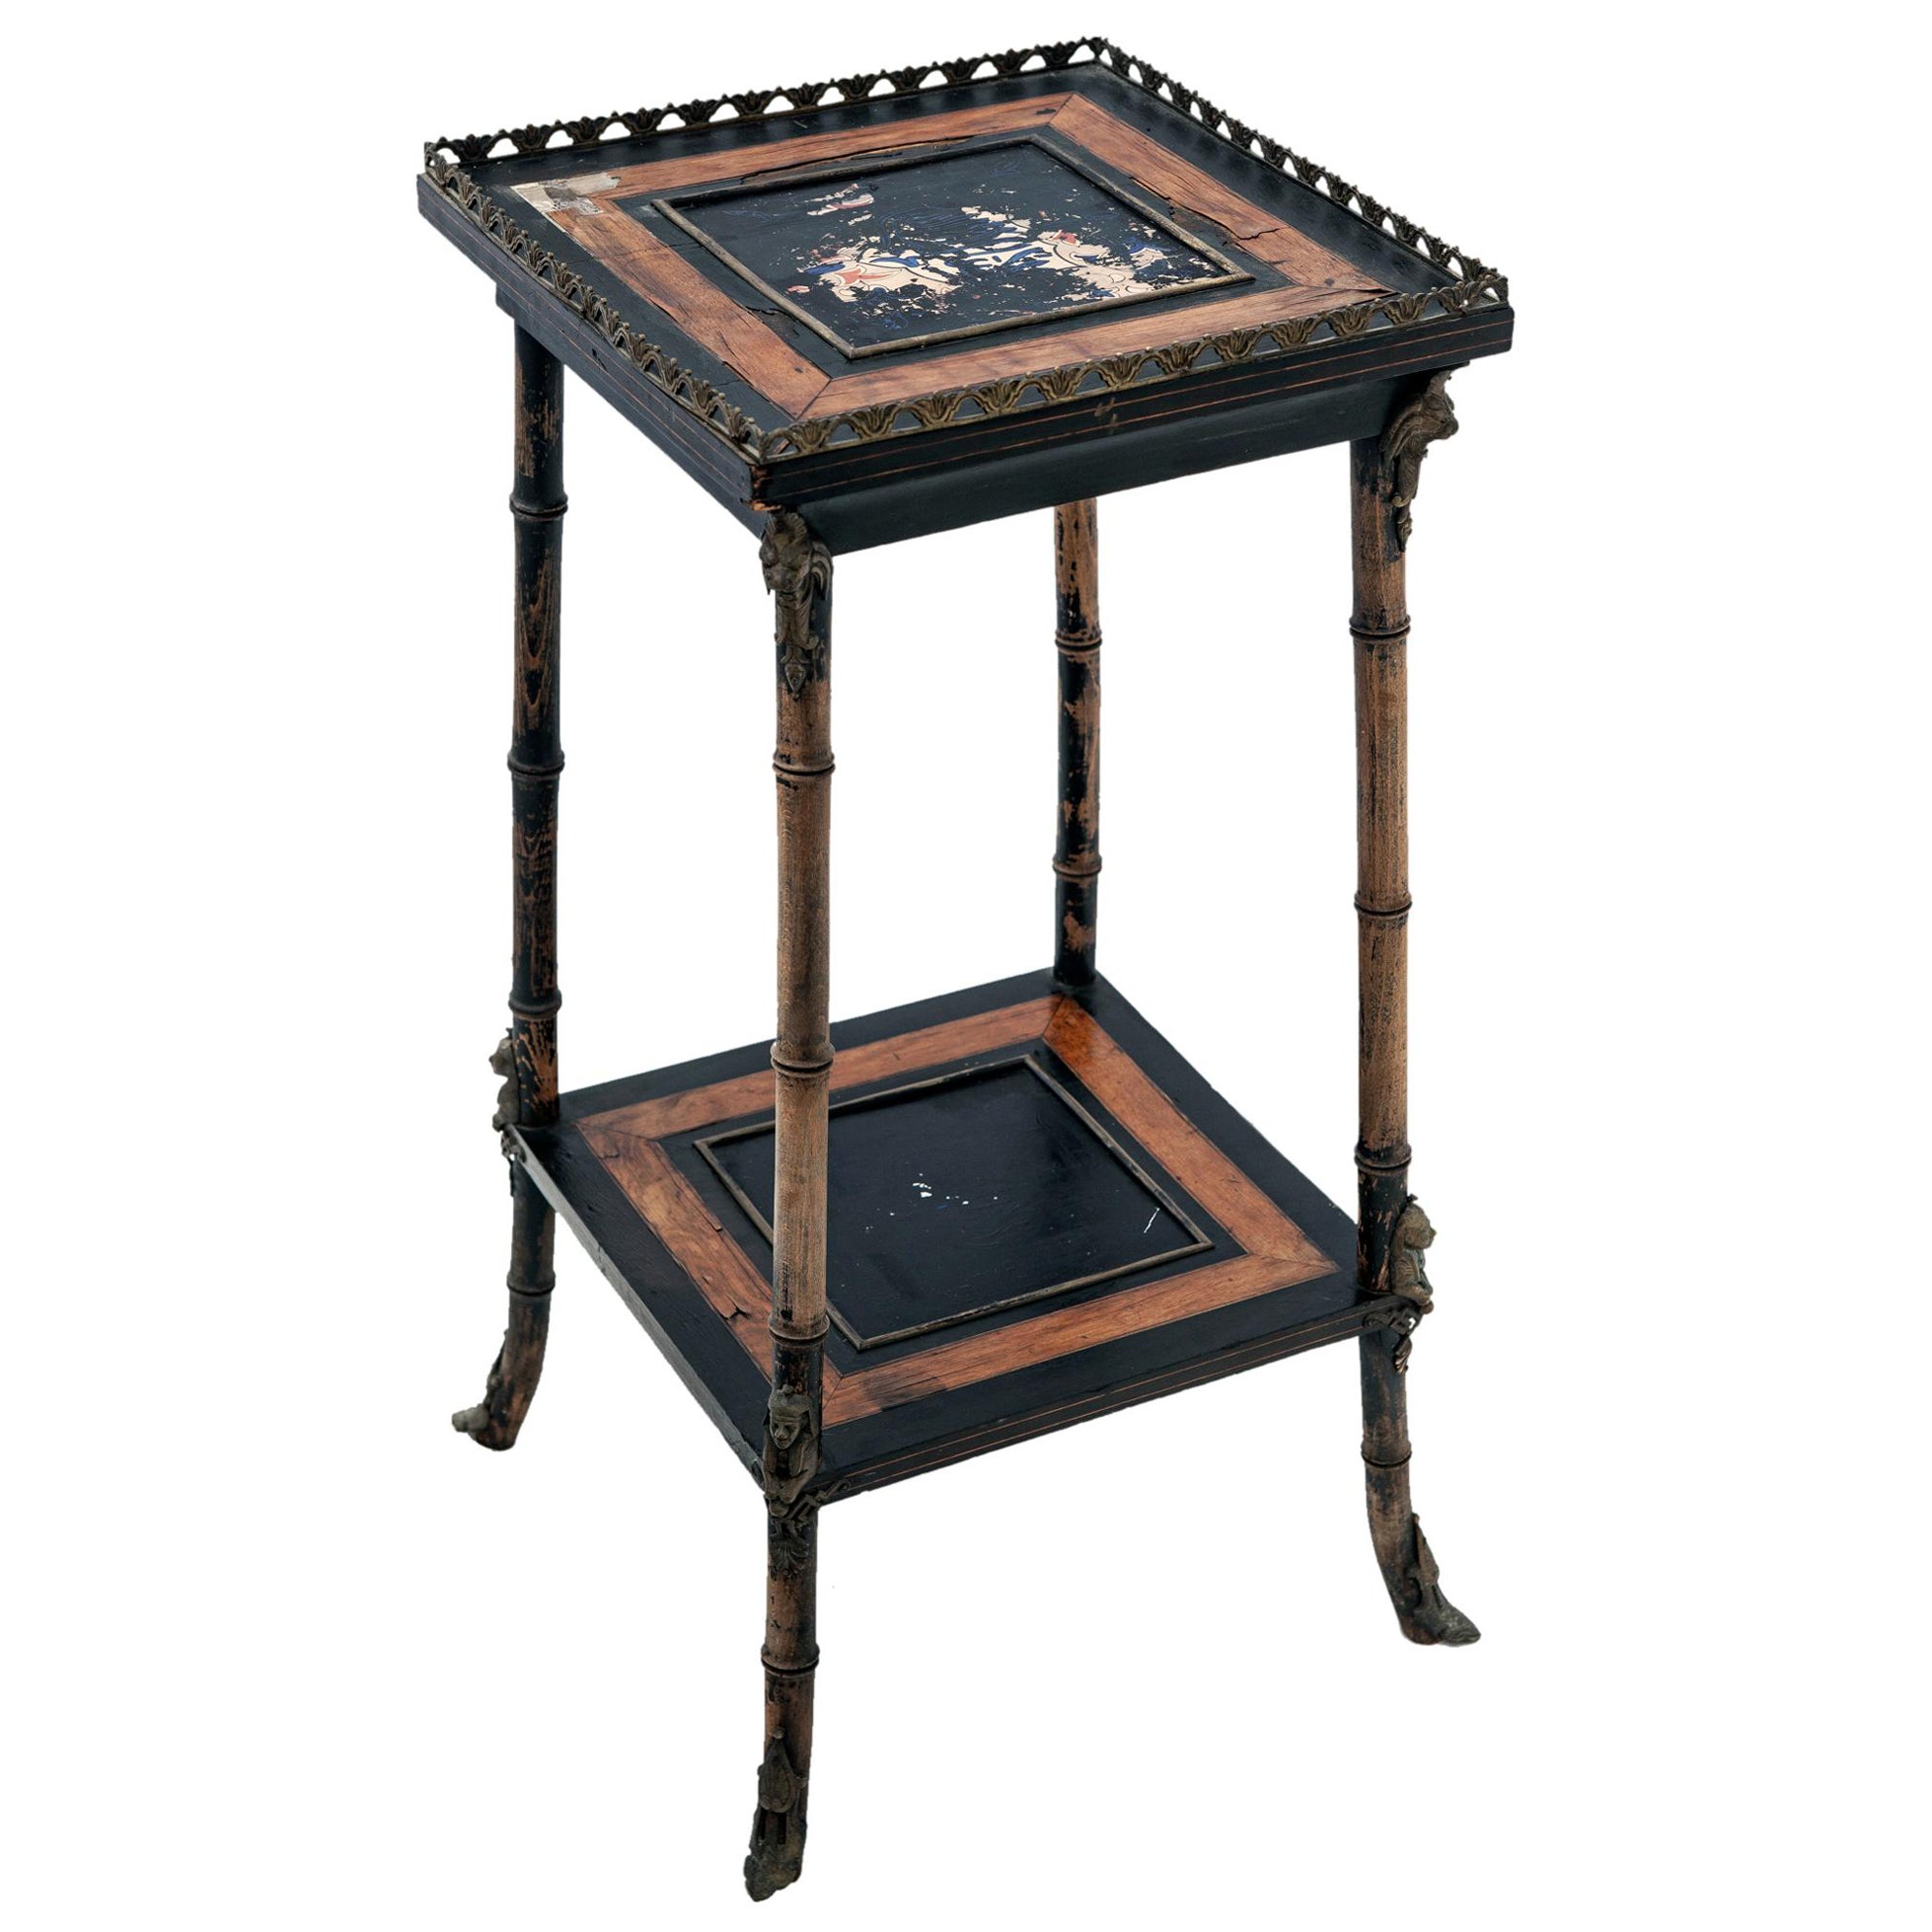 Egyptian Revival Plant Stand with Inlaid Tile Top & Bronze Cage Trim. For Sale